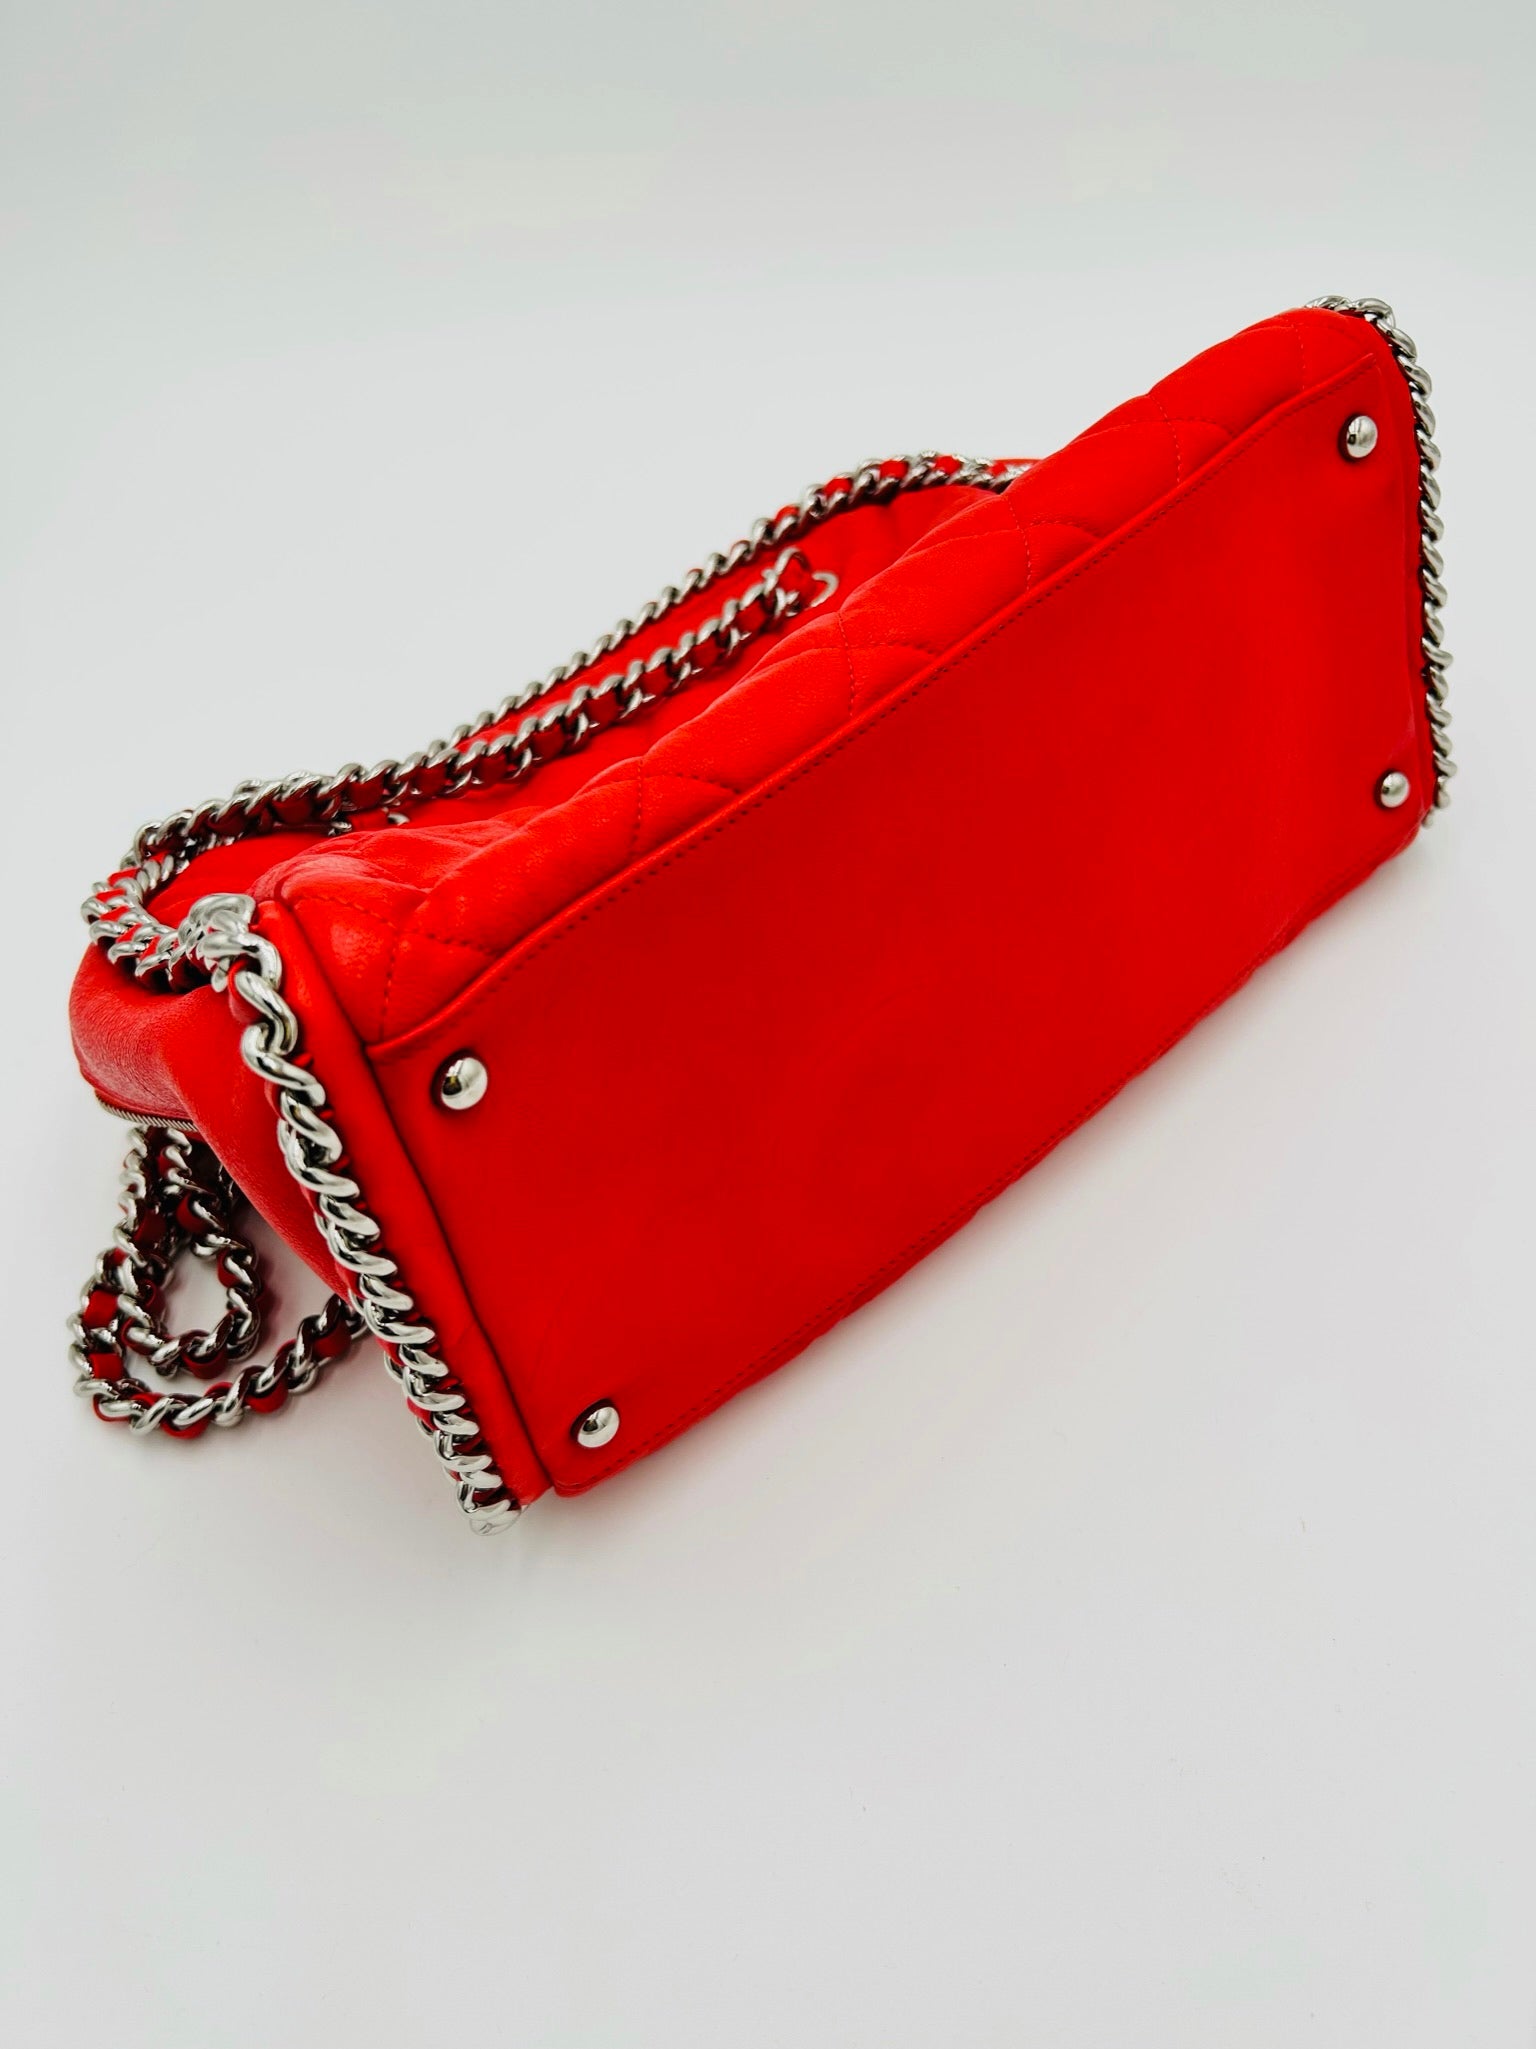 CHANEL CRUMPLED CALFSKIN CHAIN ALL OVER BRIGHT RED